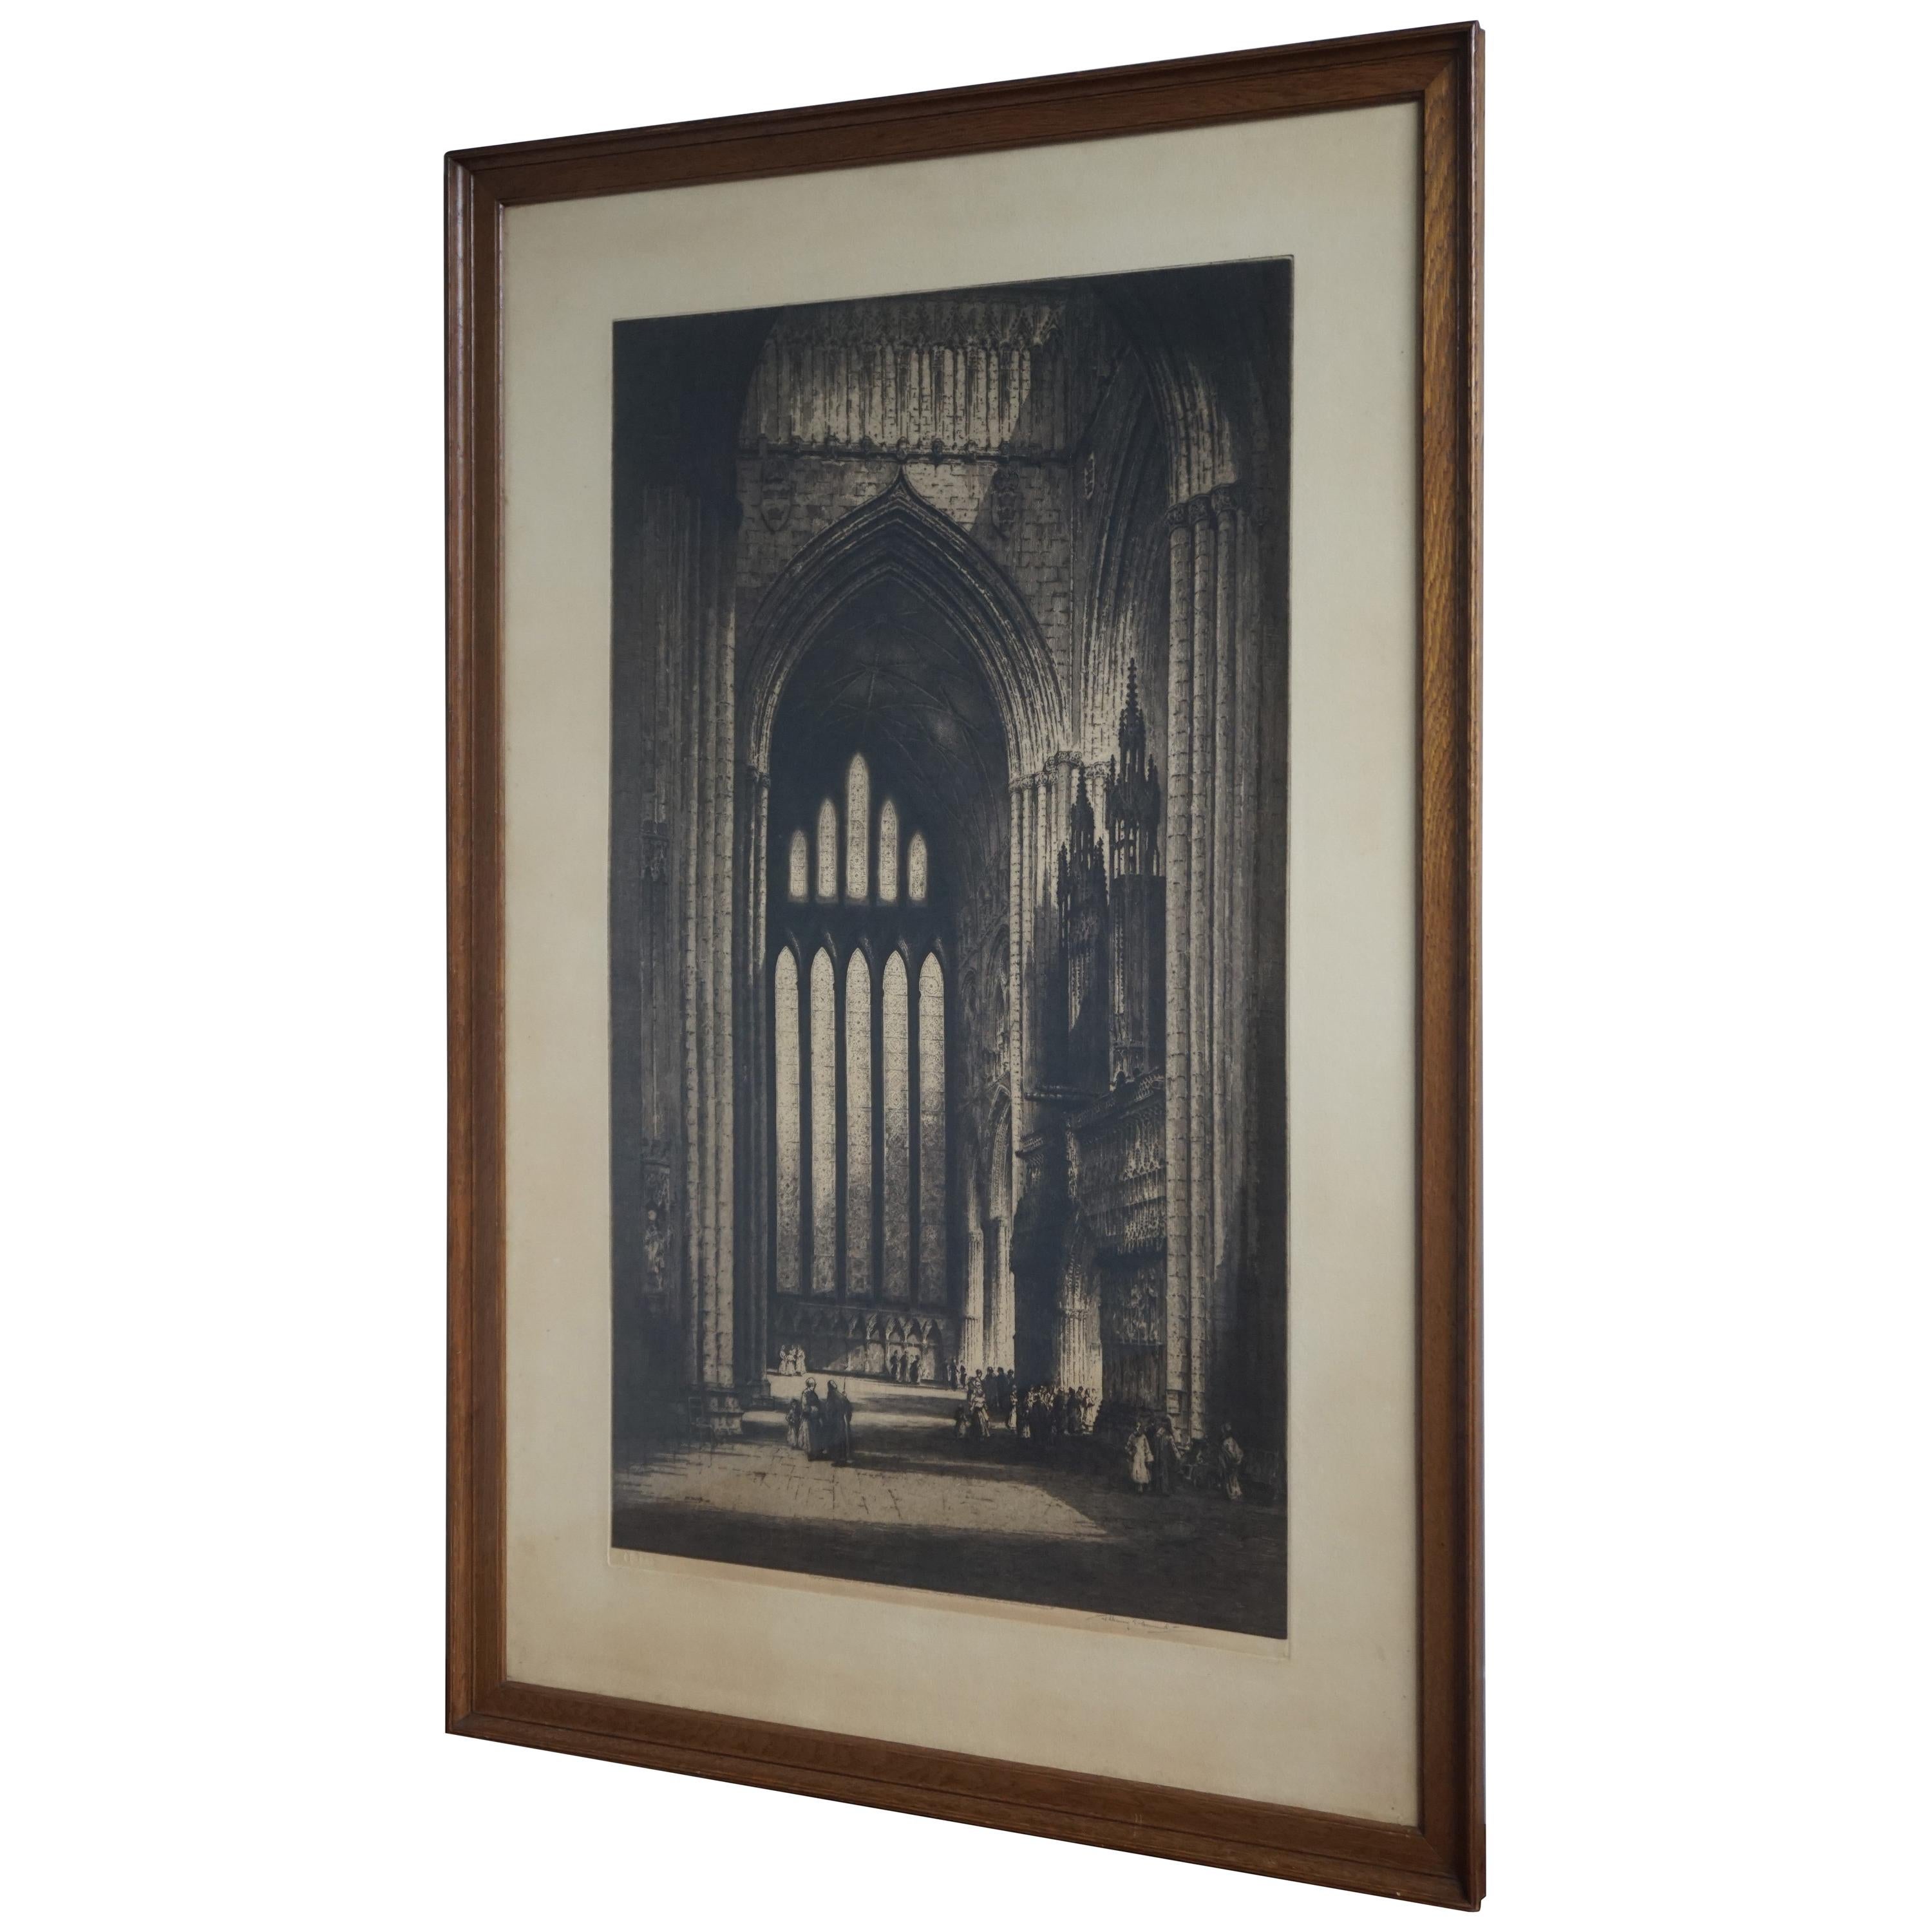 Rare & Large Antique Gothic Cathedral / Church Etching Signed Albany Edmond 1915